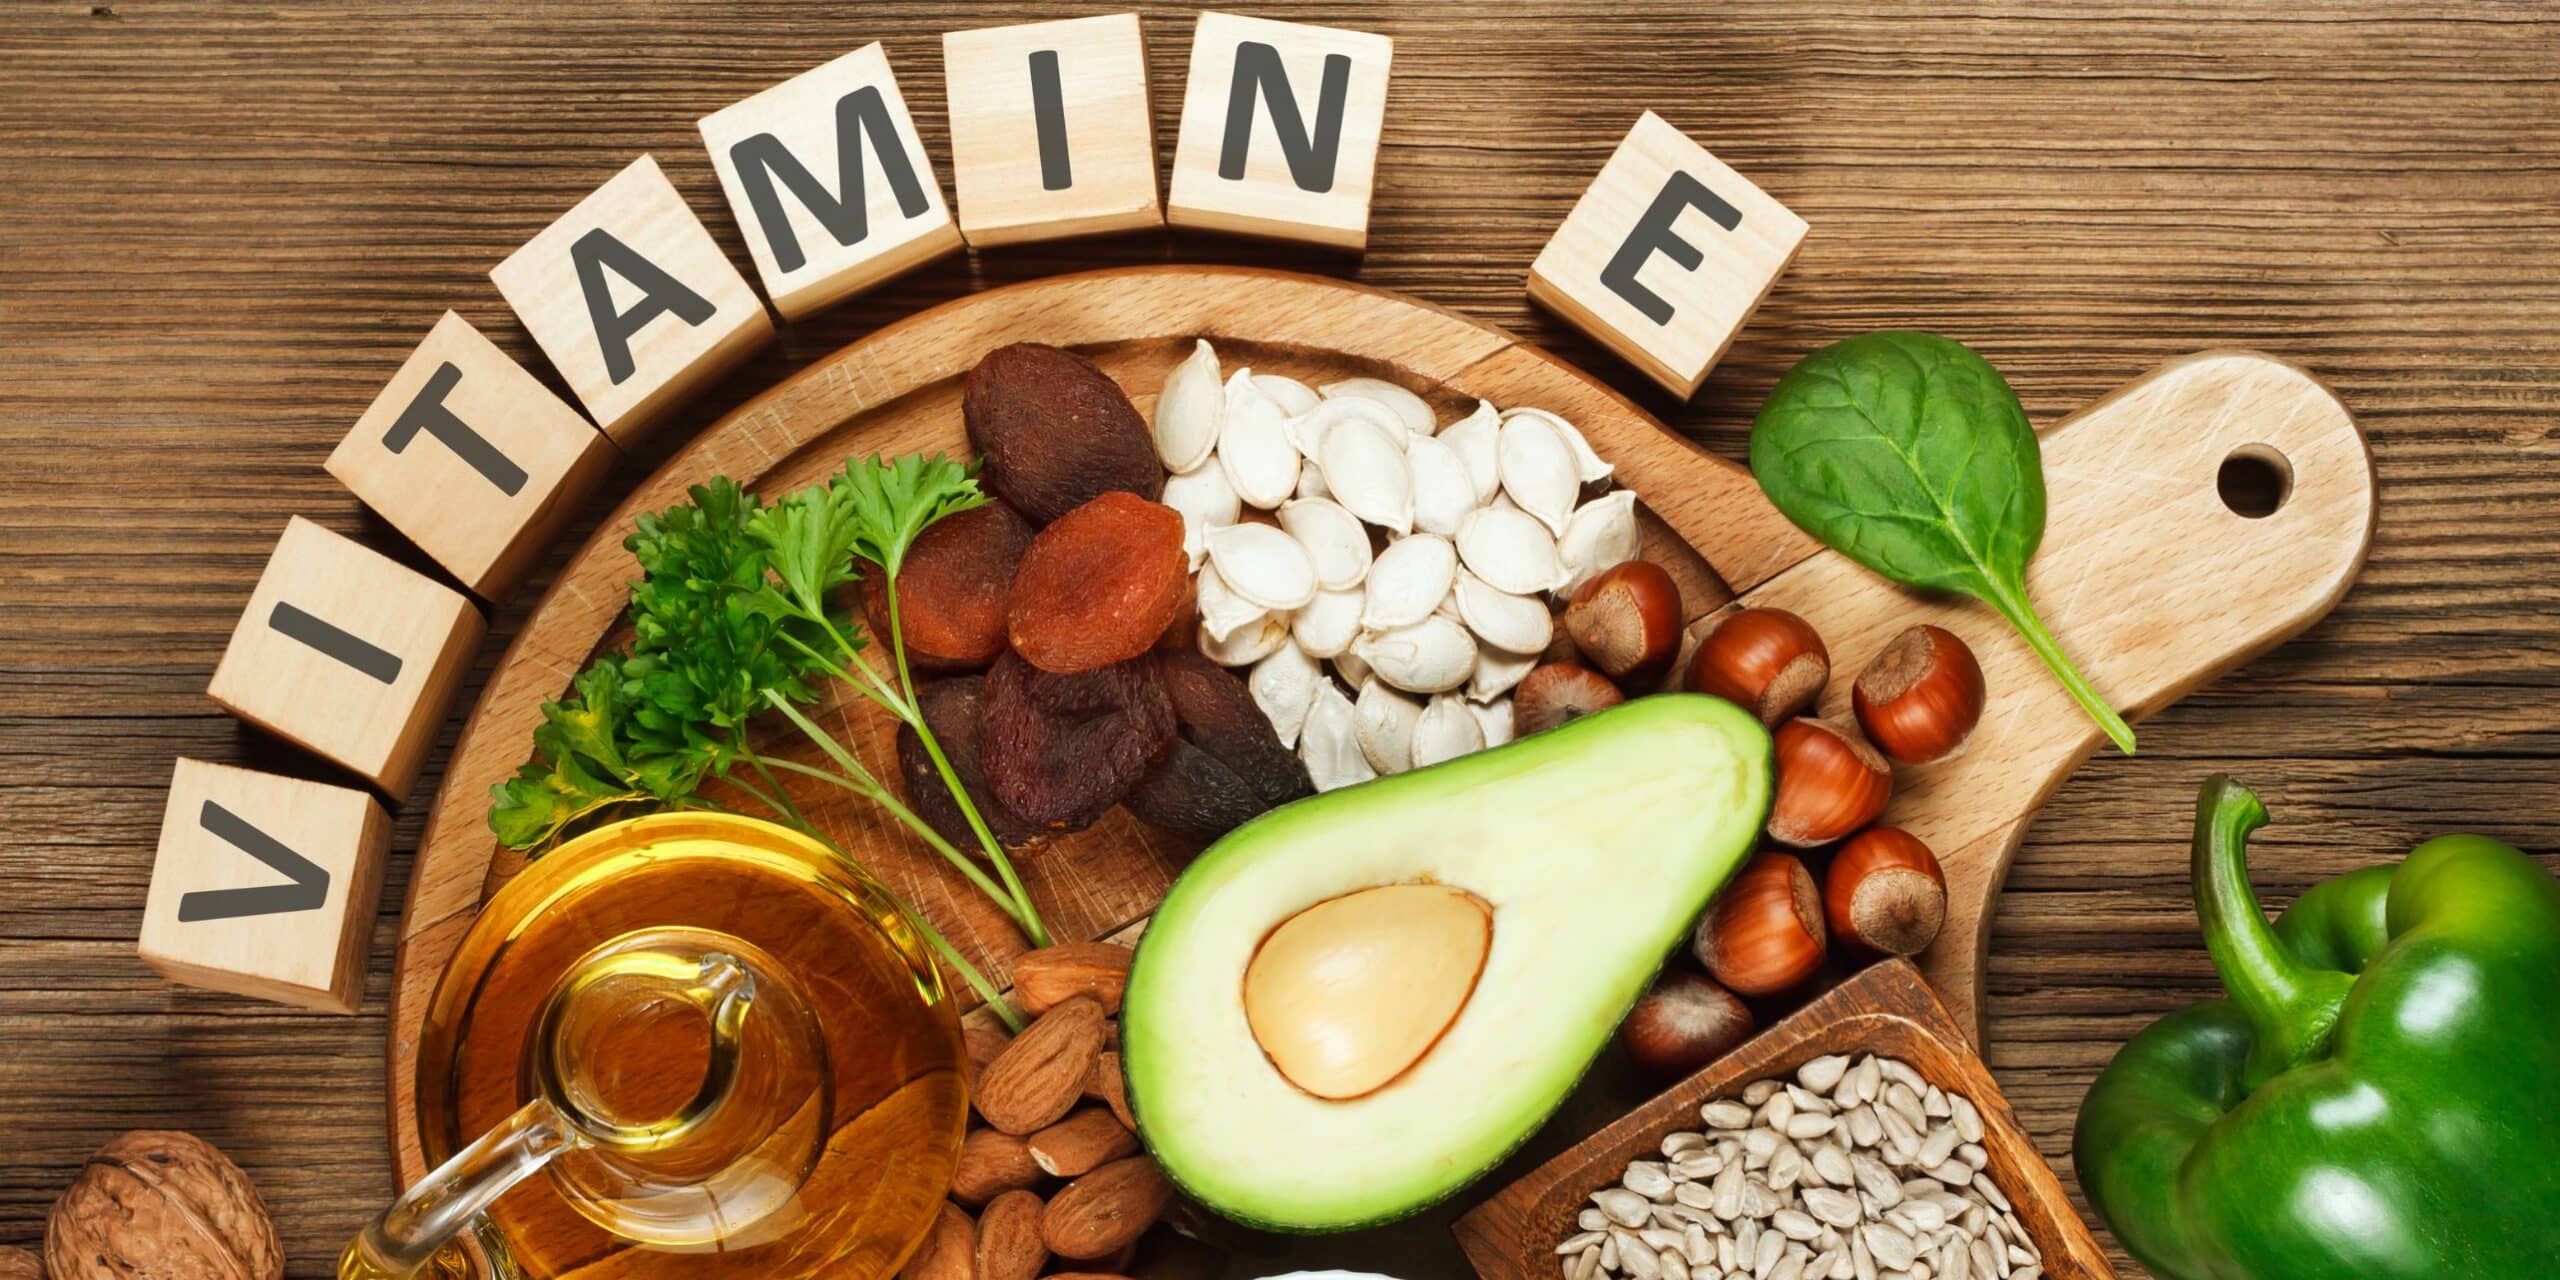 blocks spelling out vitamin E with foods that contain vitamin E